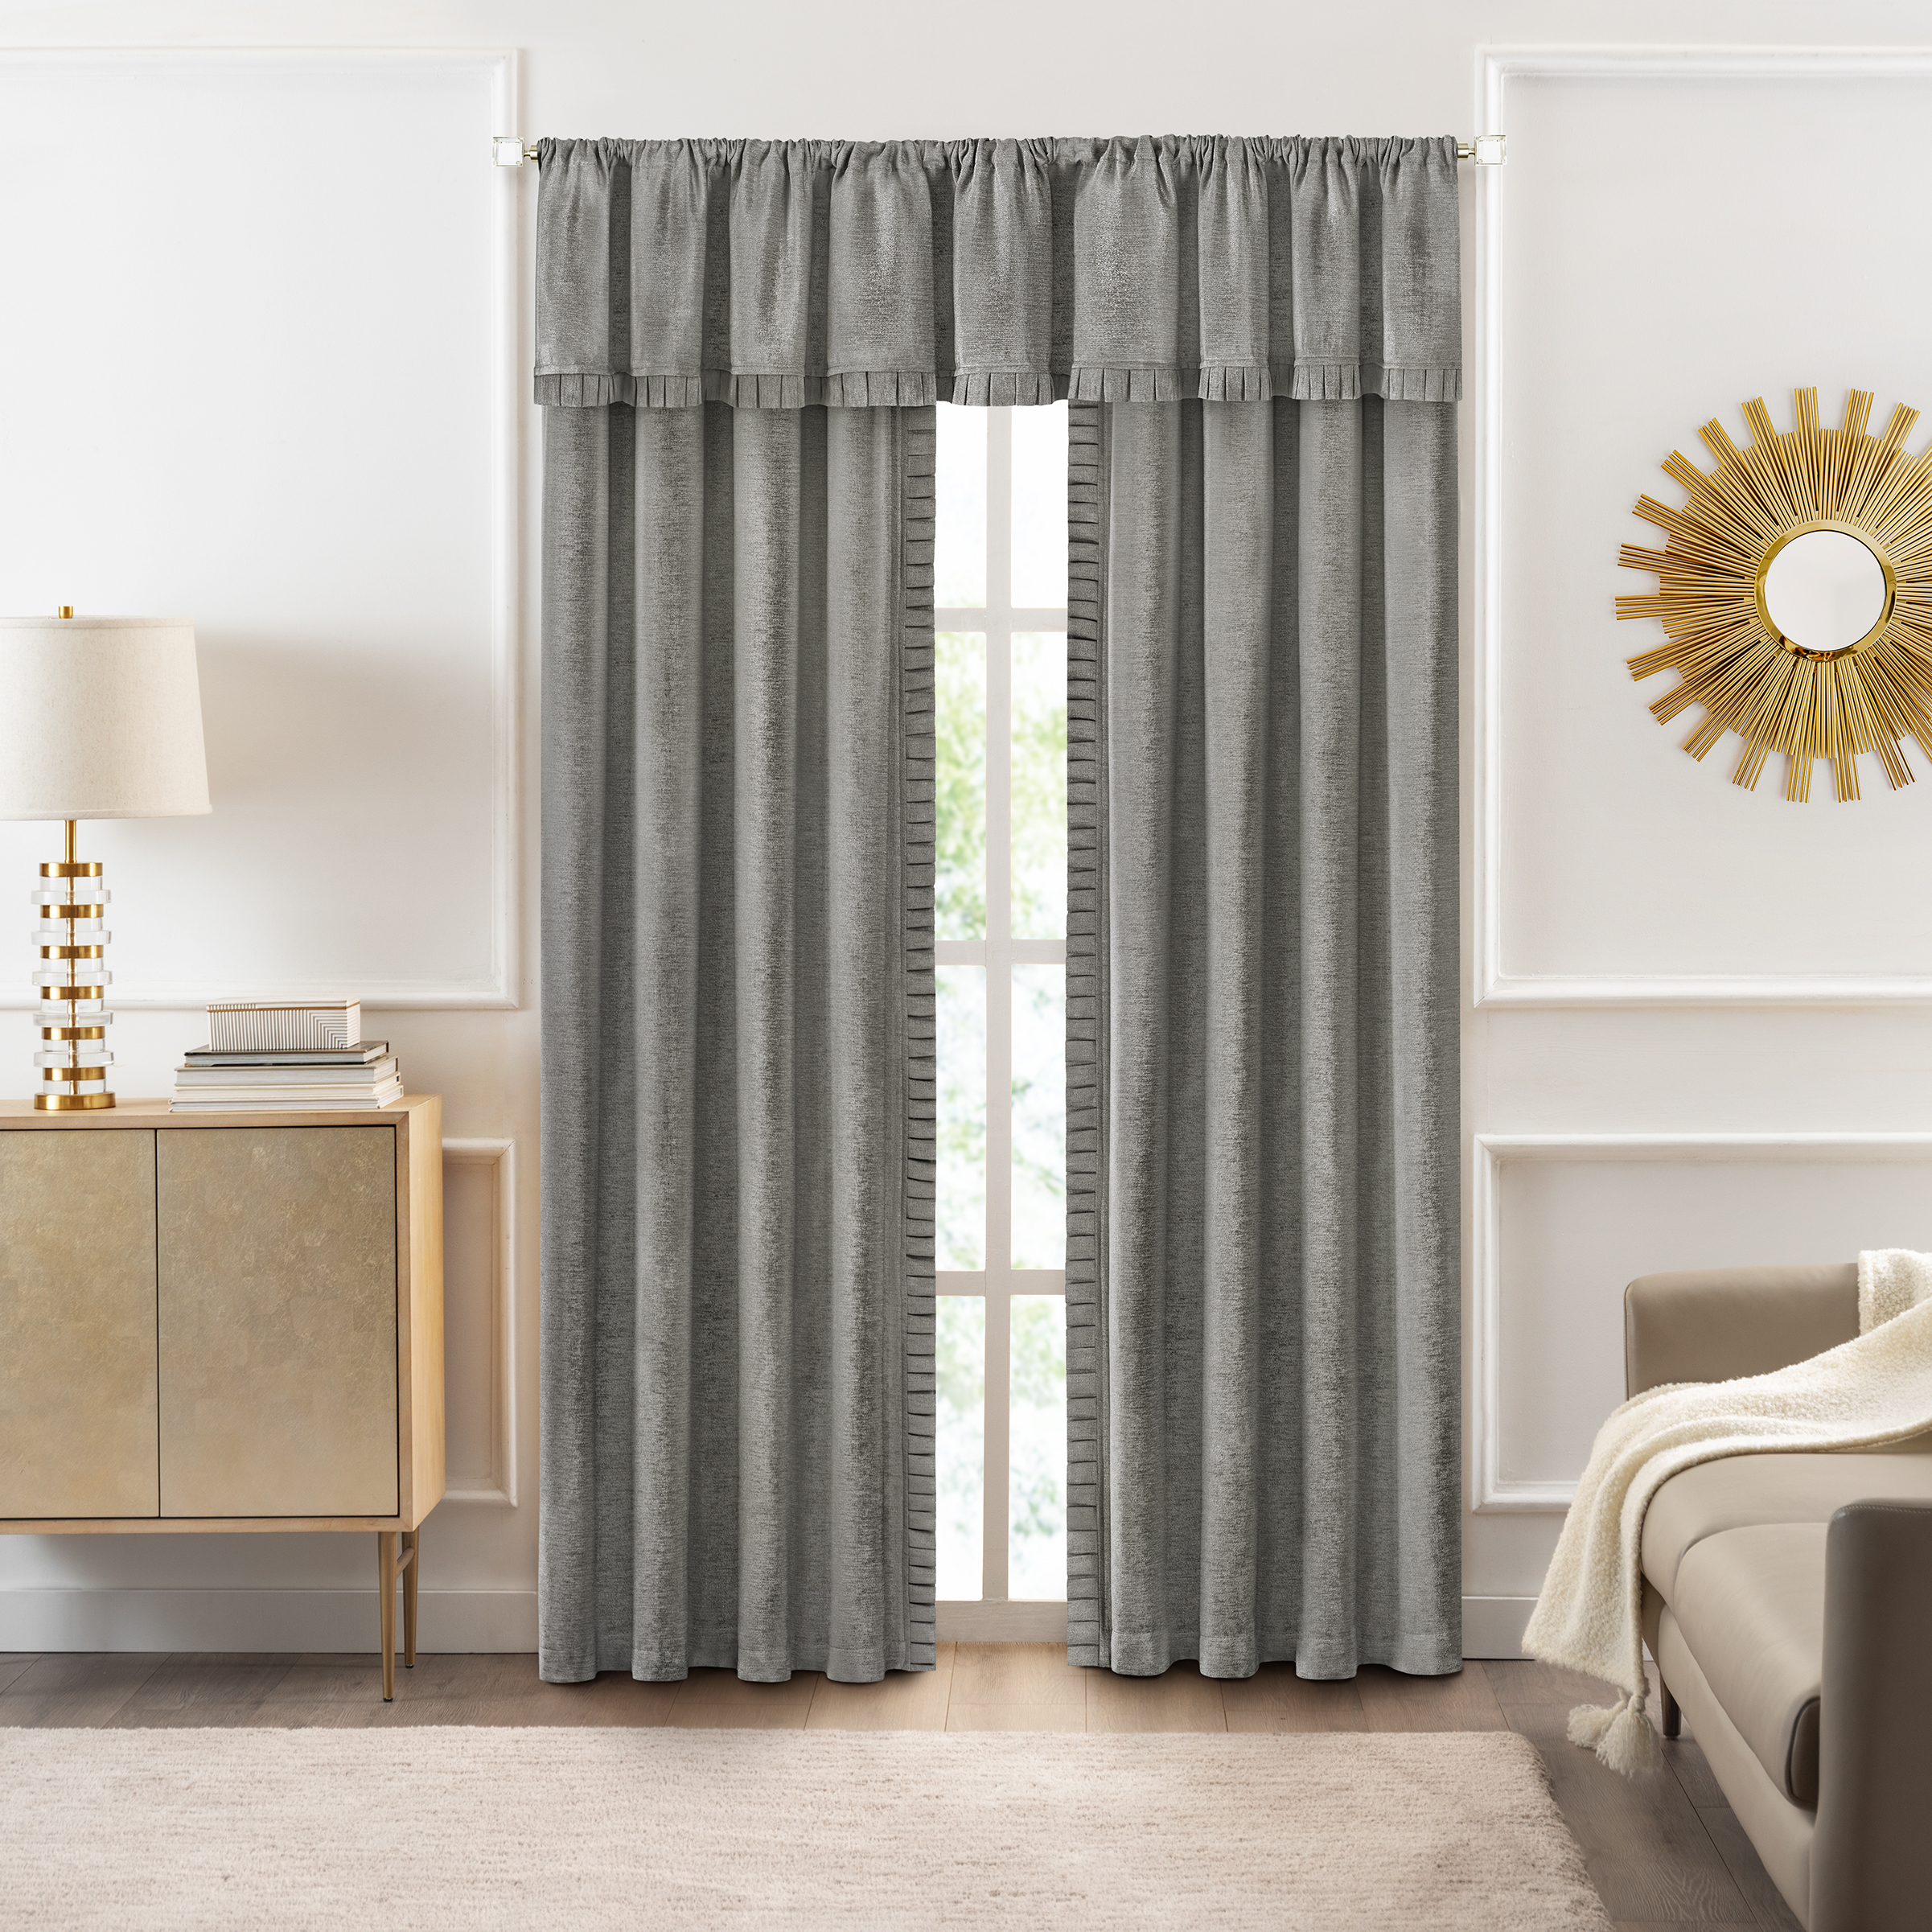 Achim Bordeaux Indoor Polyester Light Filtering Solid Curtain Panel, Silver, 52-in W x 63-in L - image 3 of 7